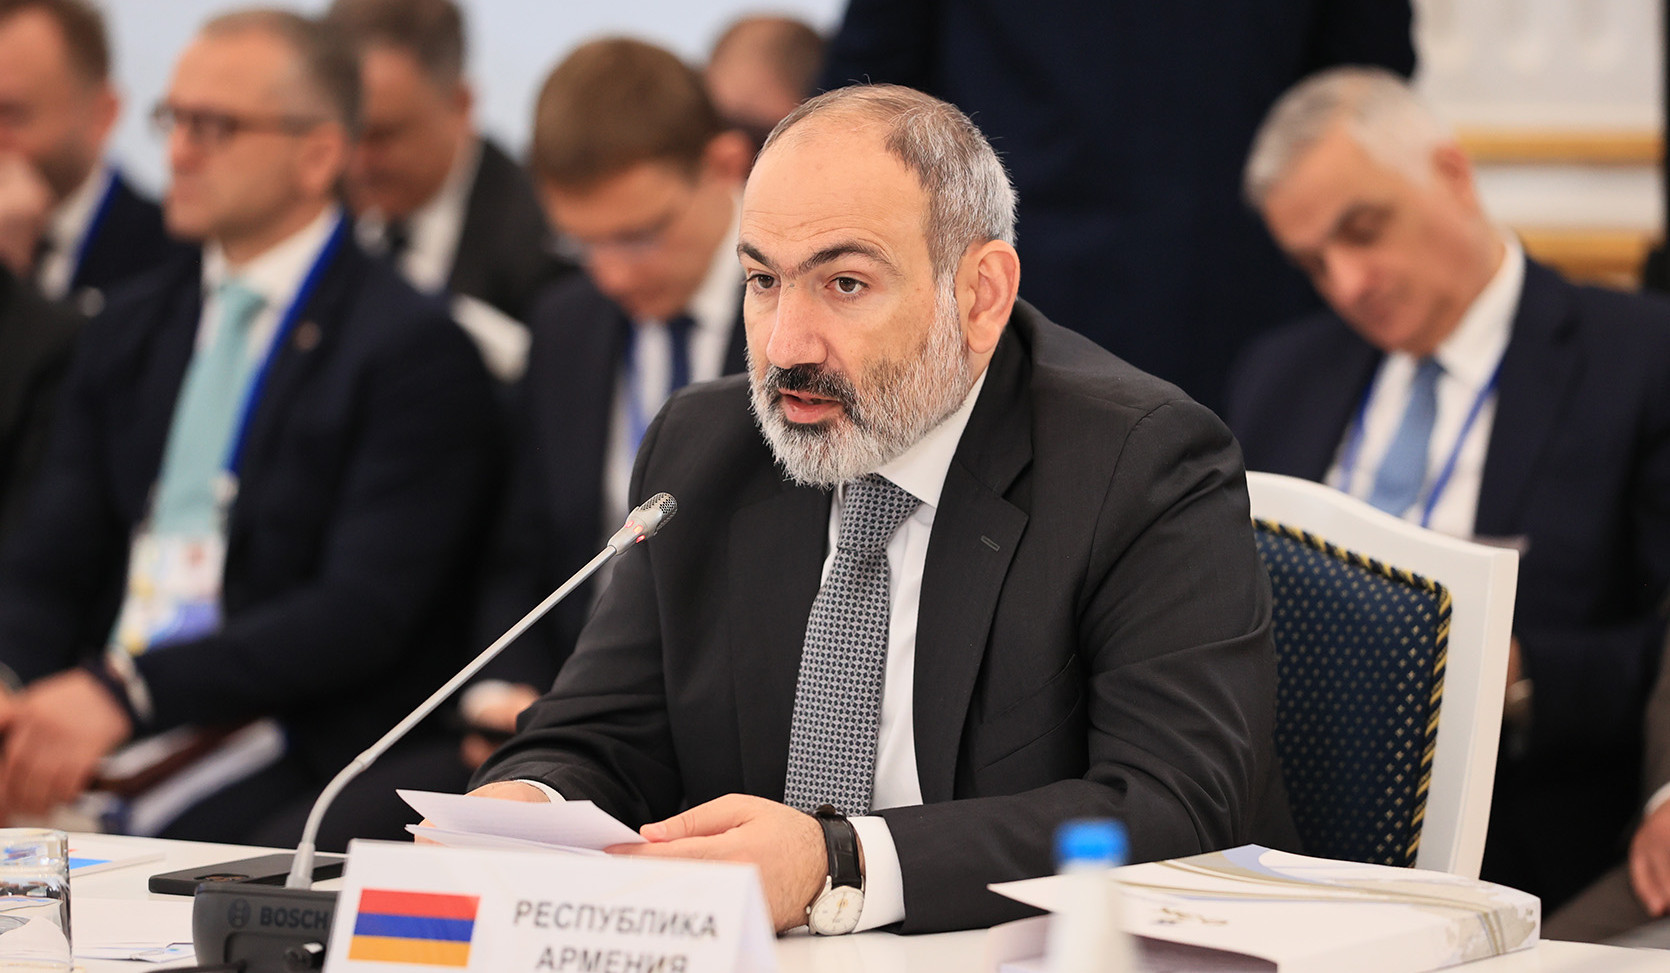 EEU is entering stage of revealing its integration potential for benefit of creating common economic space and sustainable economic growth: Prime Minister